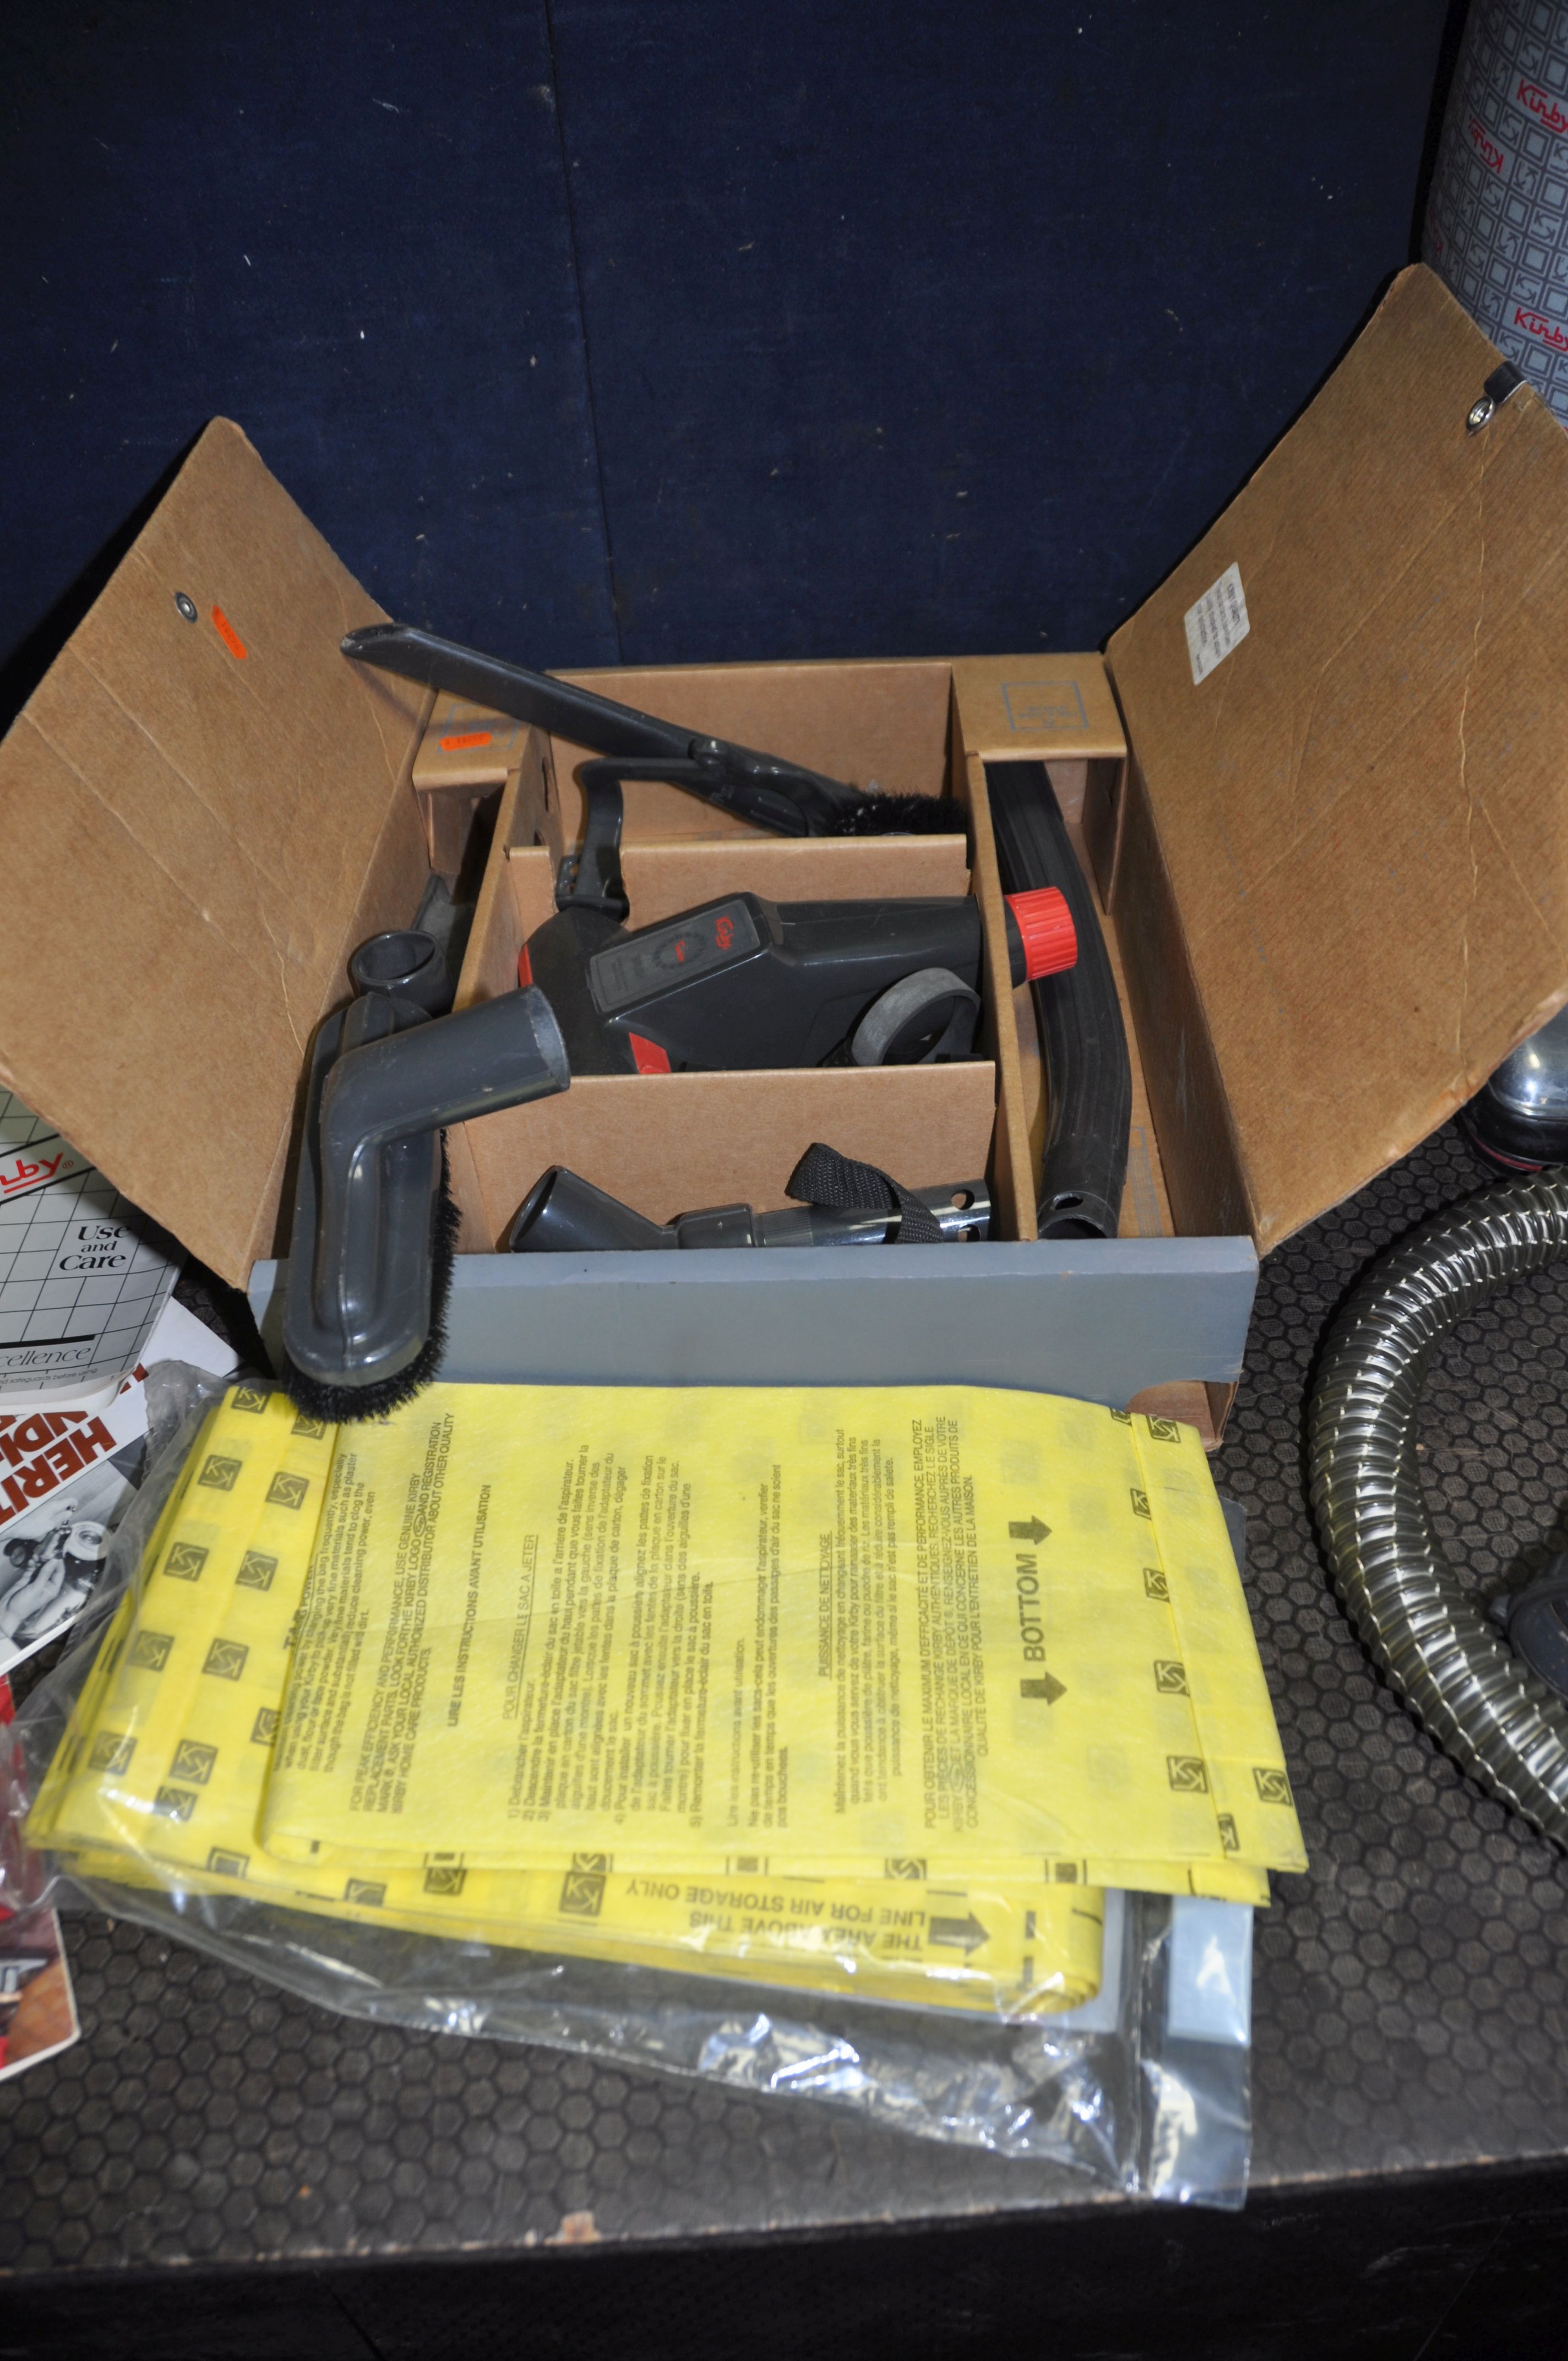 A KIRBY HERITAGE 2 UPRIGHT VACUUM CLEANER with accessory box, pipework and tubes (PAT pass and - Image 2 of 3